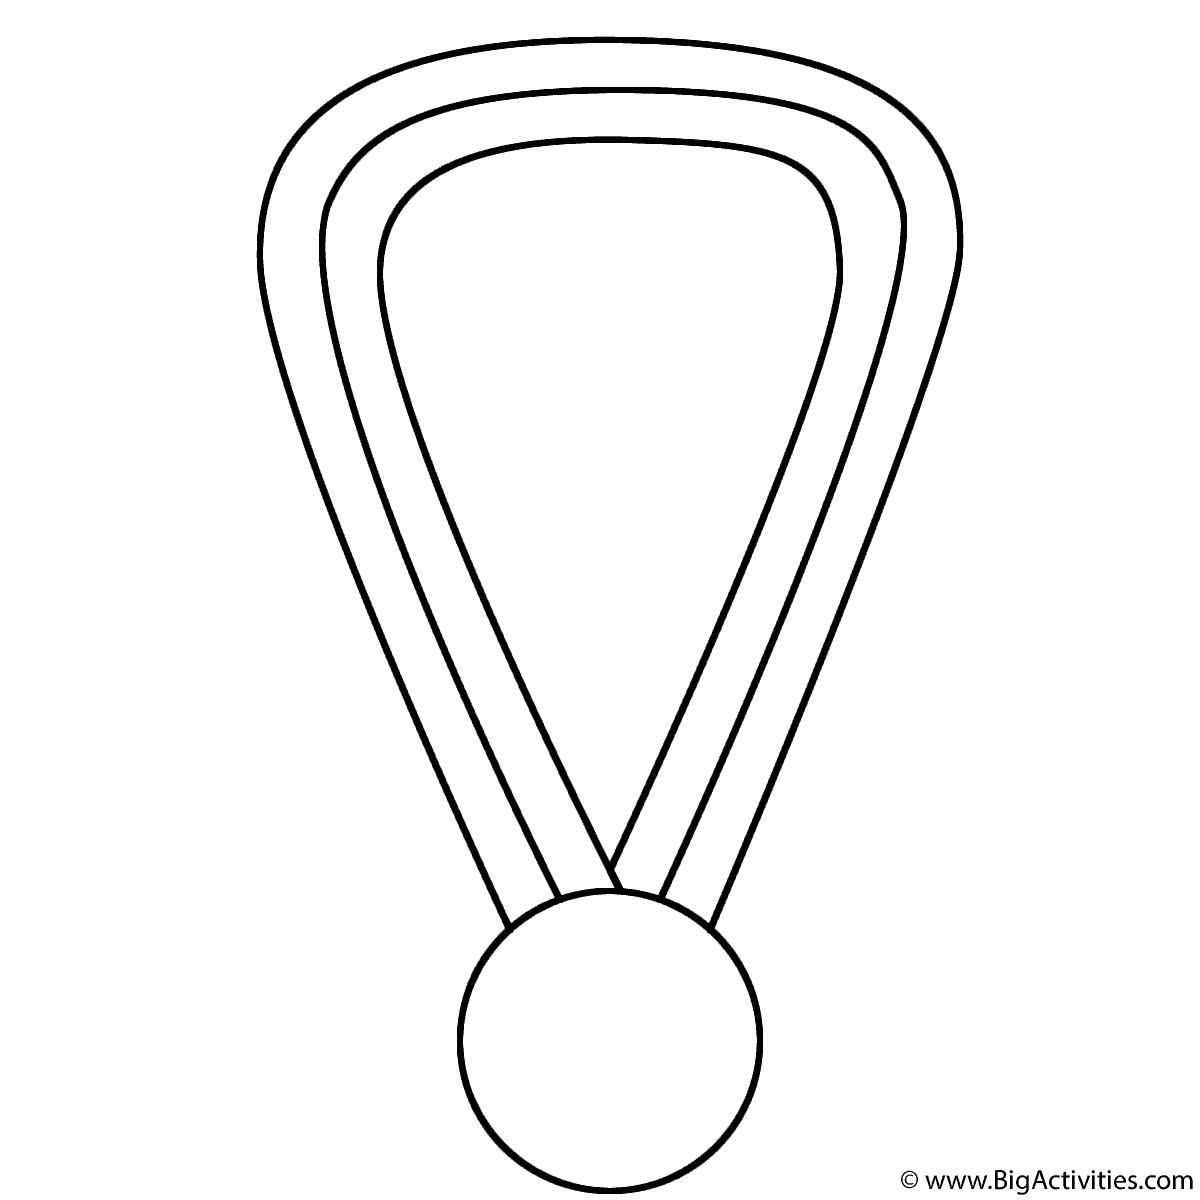 Olympic Gold Medal - Coloring Page (Olympics)